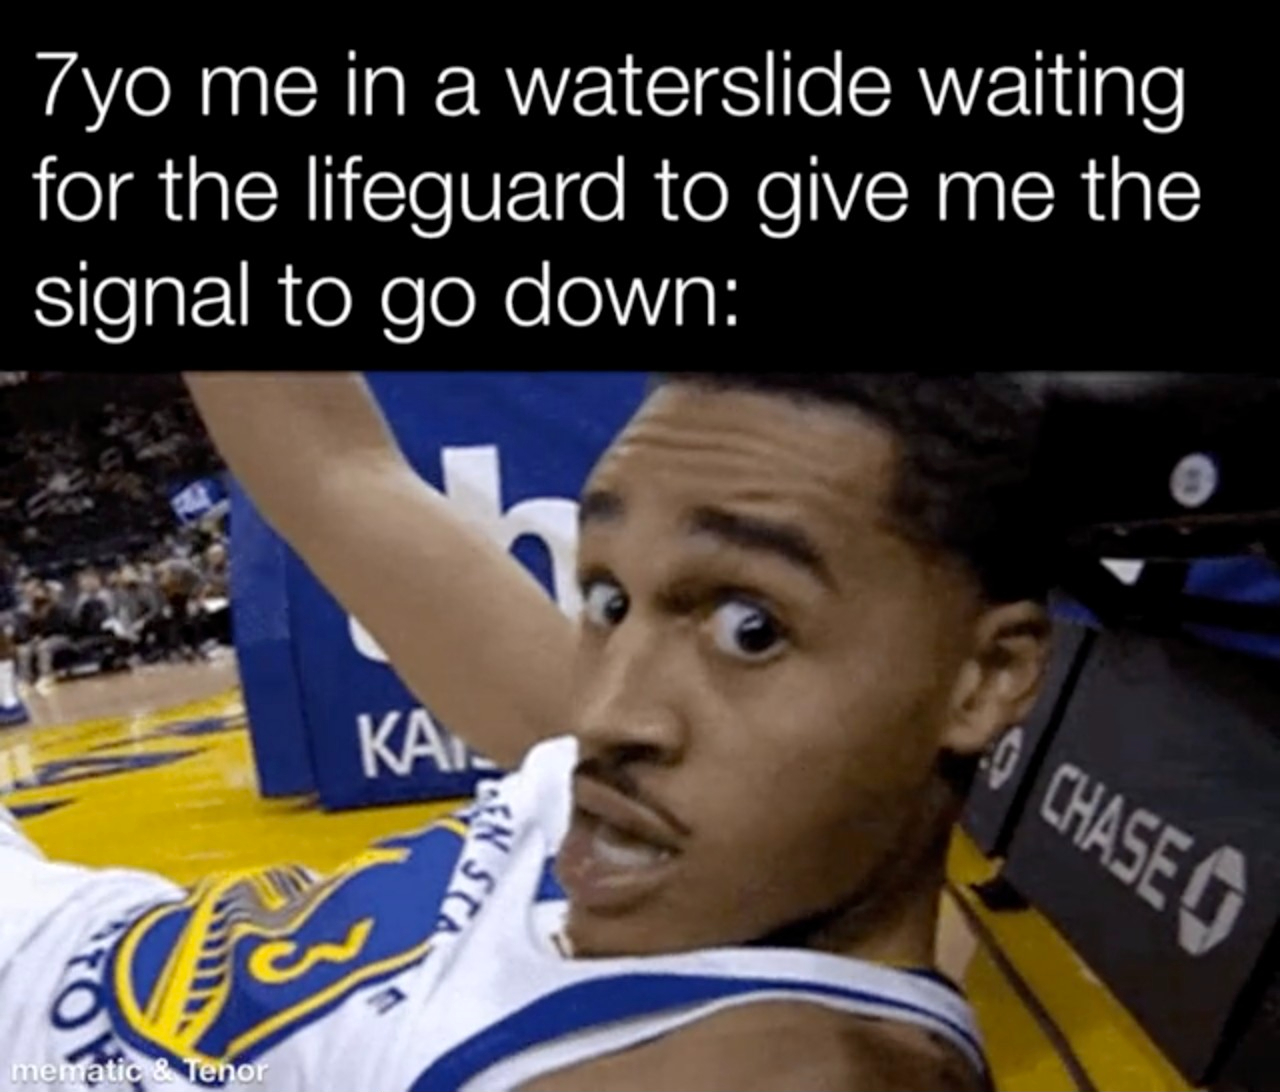 Dank Memes - jordan poole cool - 7yo me in a waterslide waiting for the lifeguard to give me the signal to go down